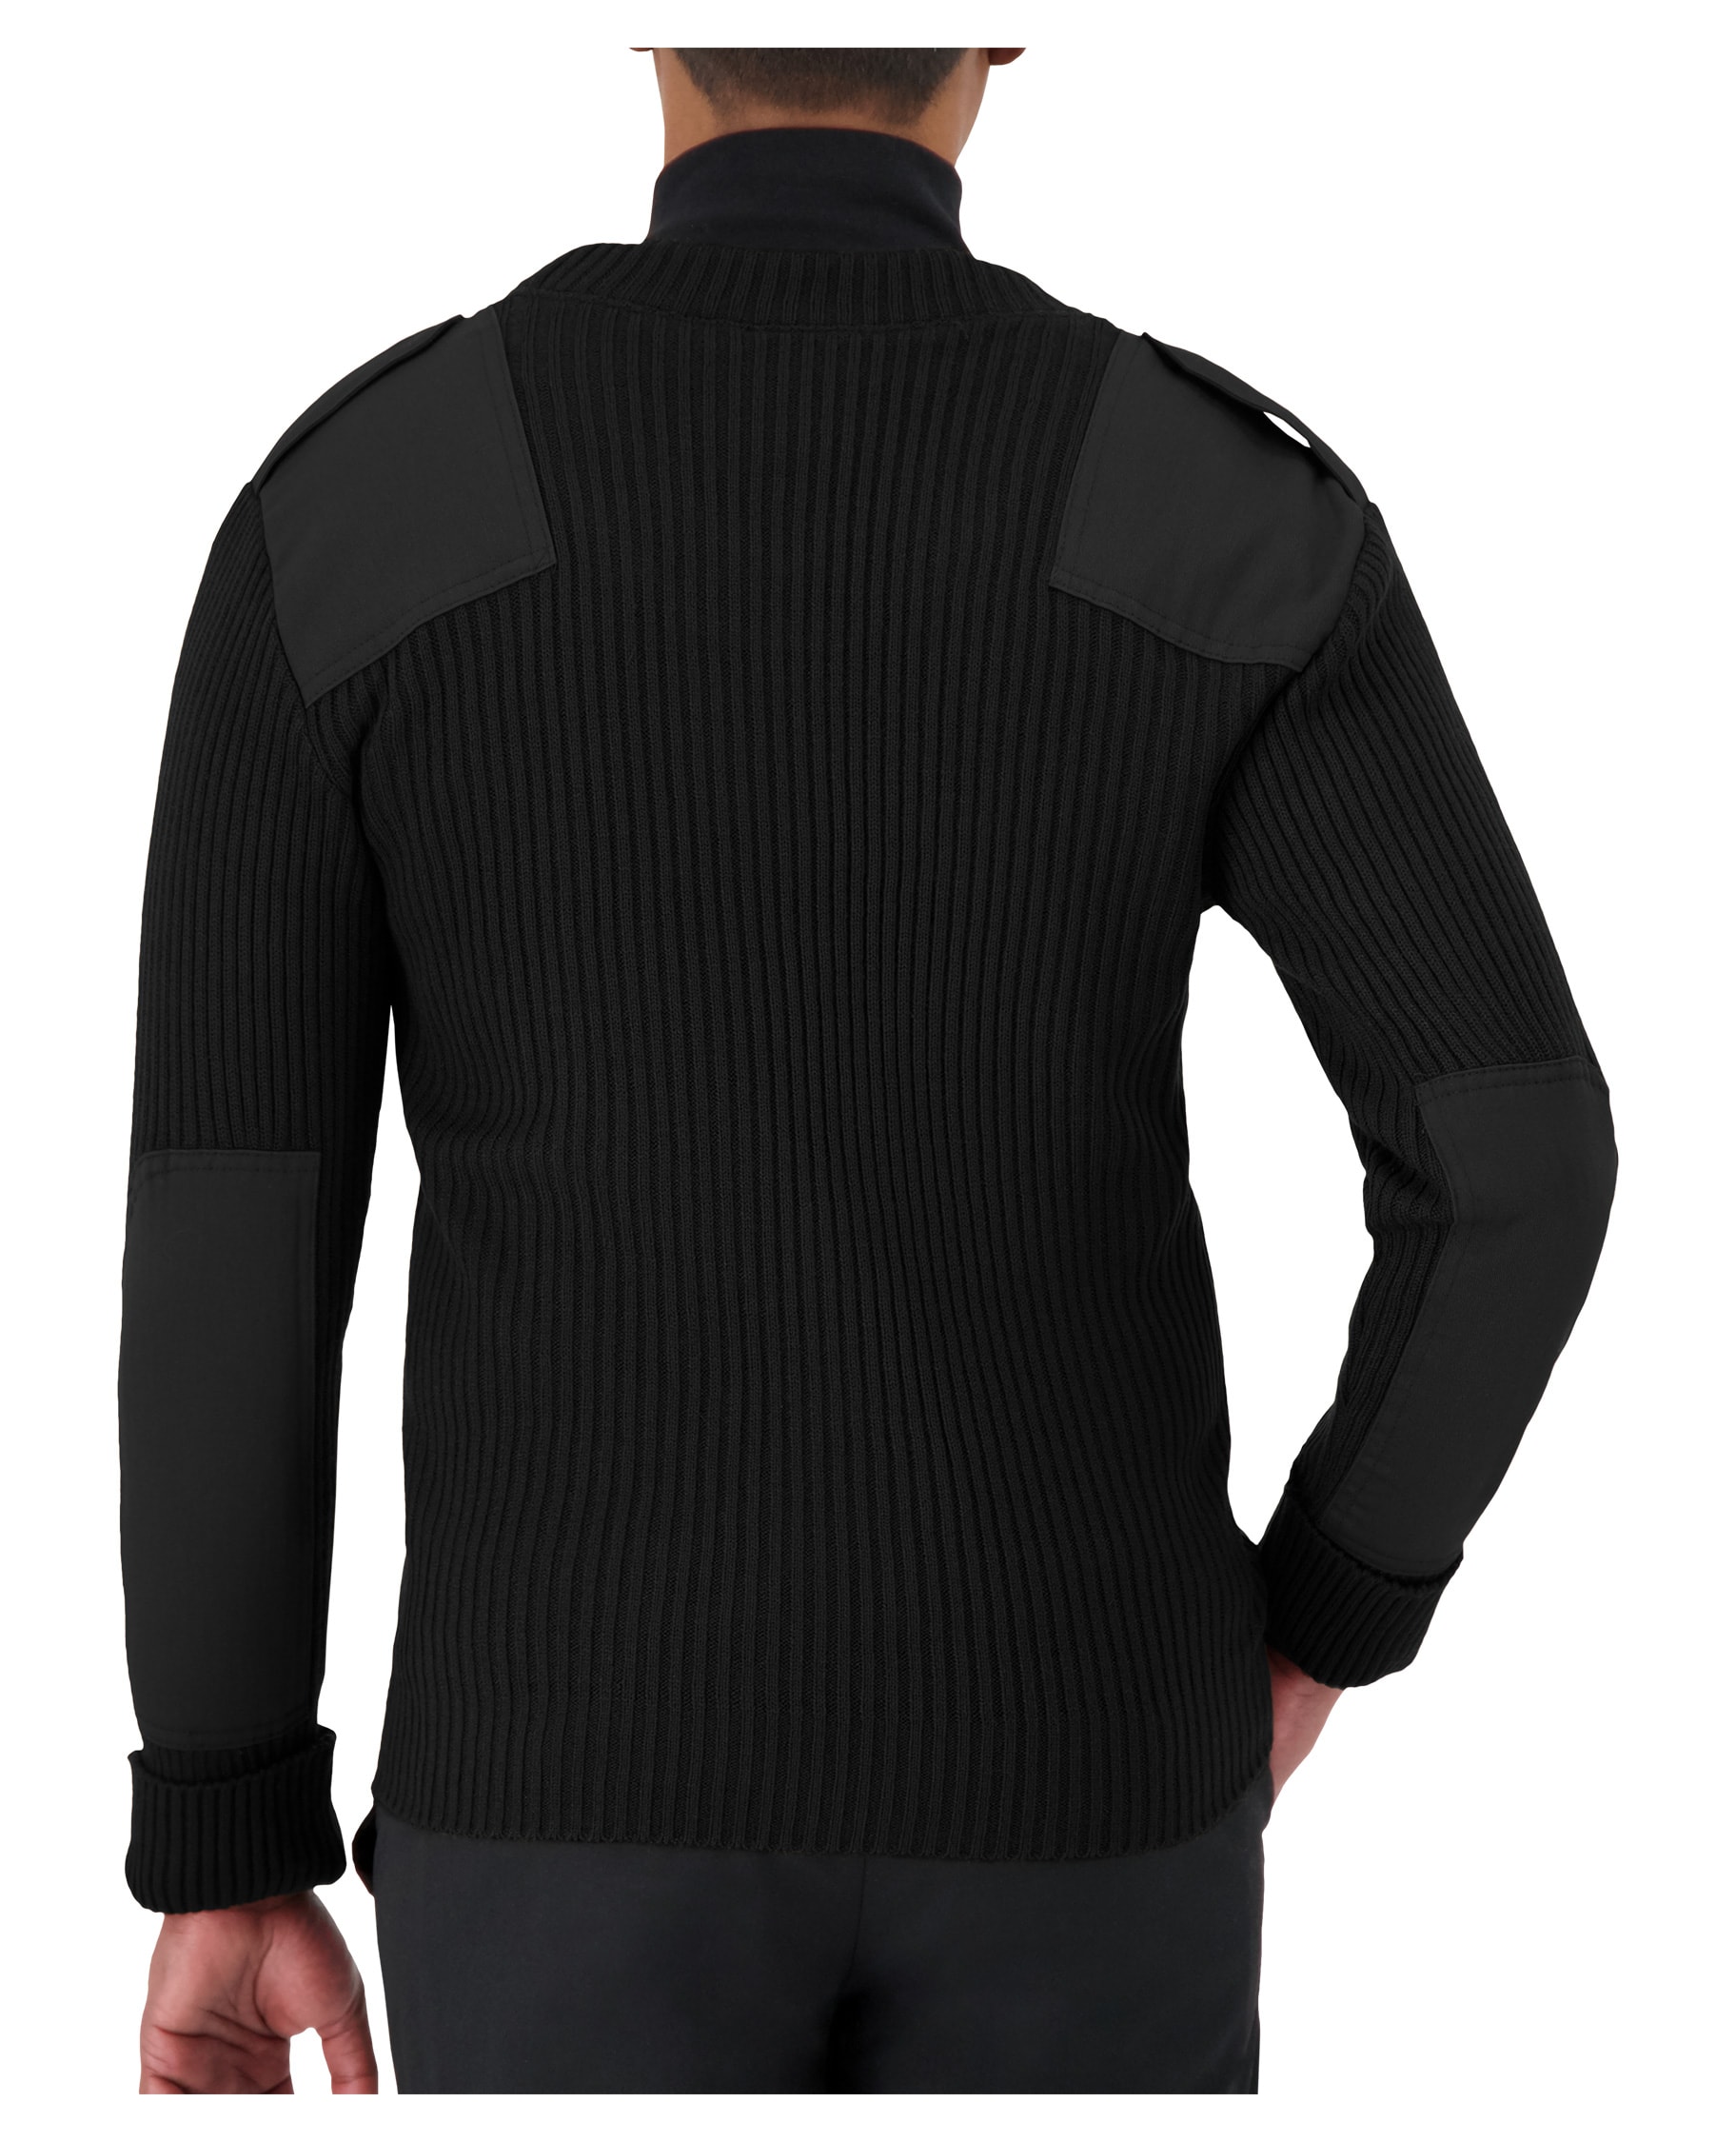 back of crew neck sweater with shoulder and elbow patches